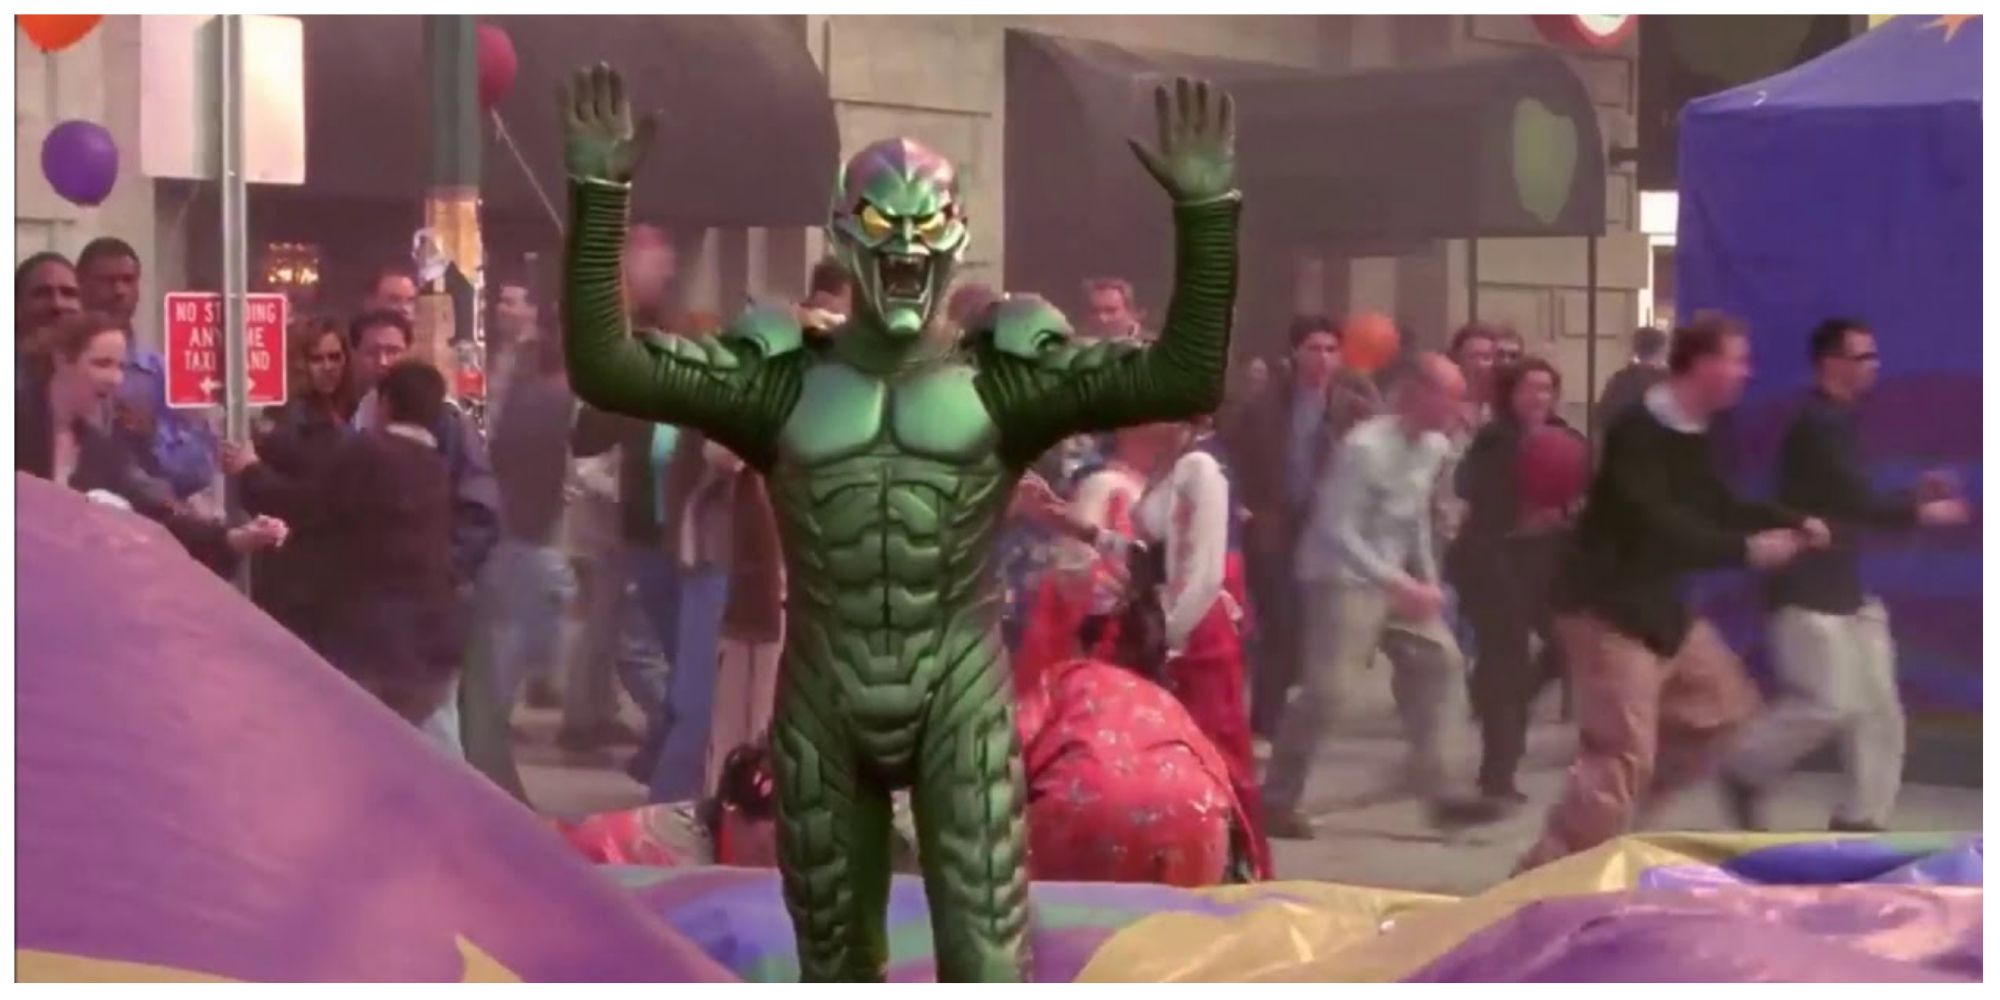 Green Goblin pretends to surrender in the middle of the festival